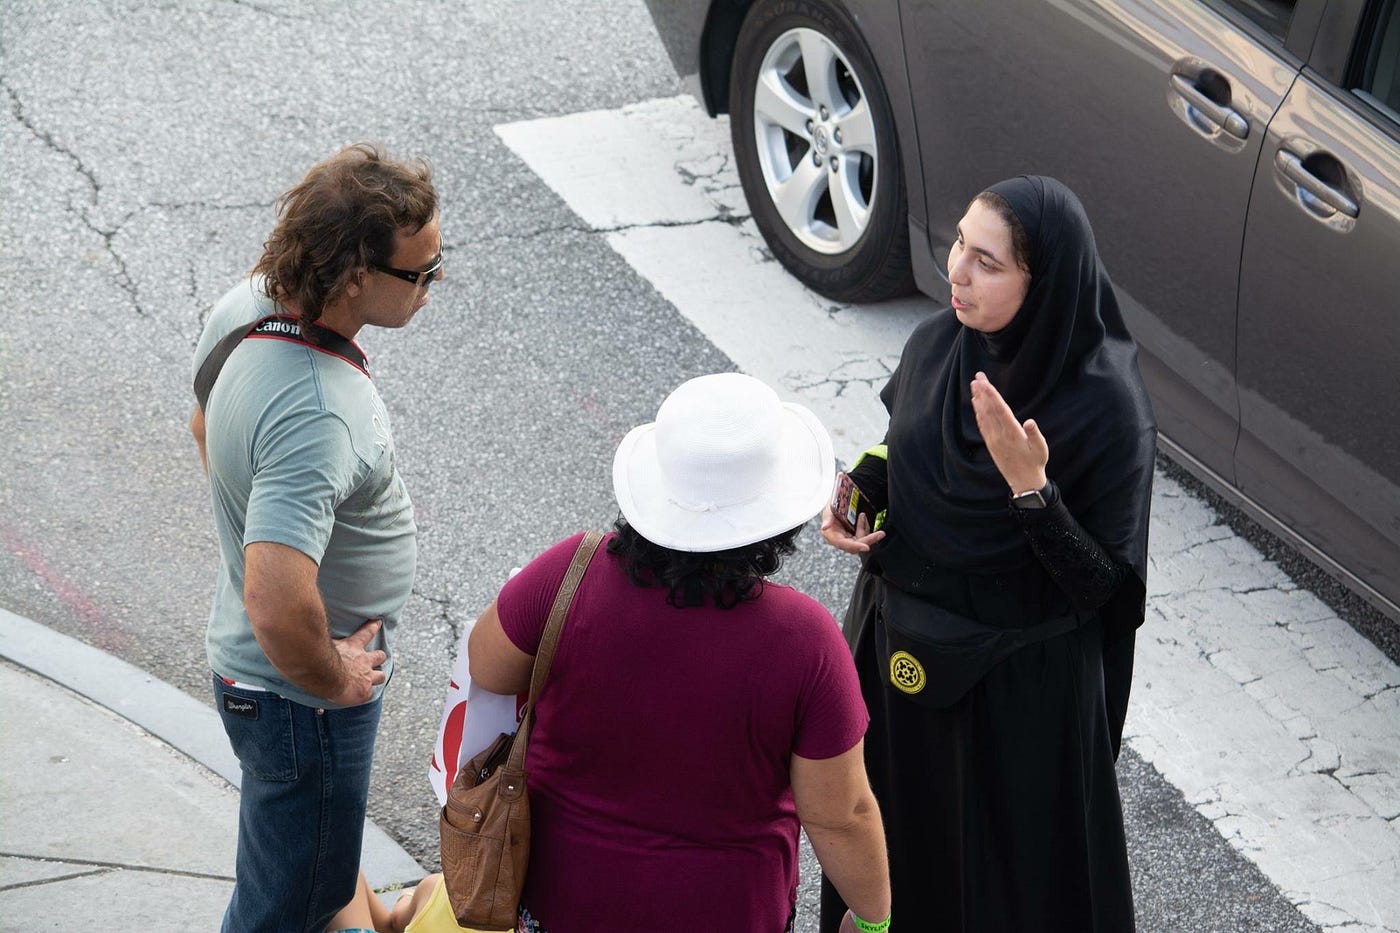 An image of Syeda speaking with two people on a sidewalk.